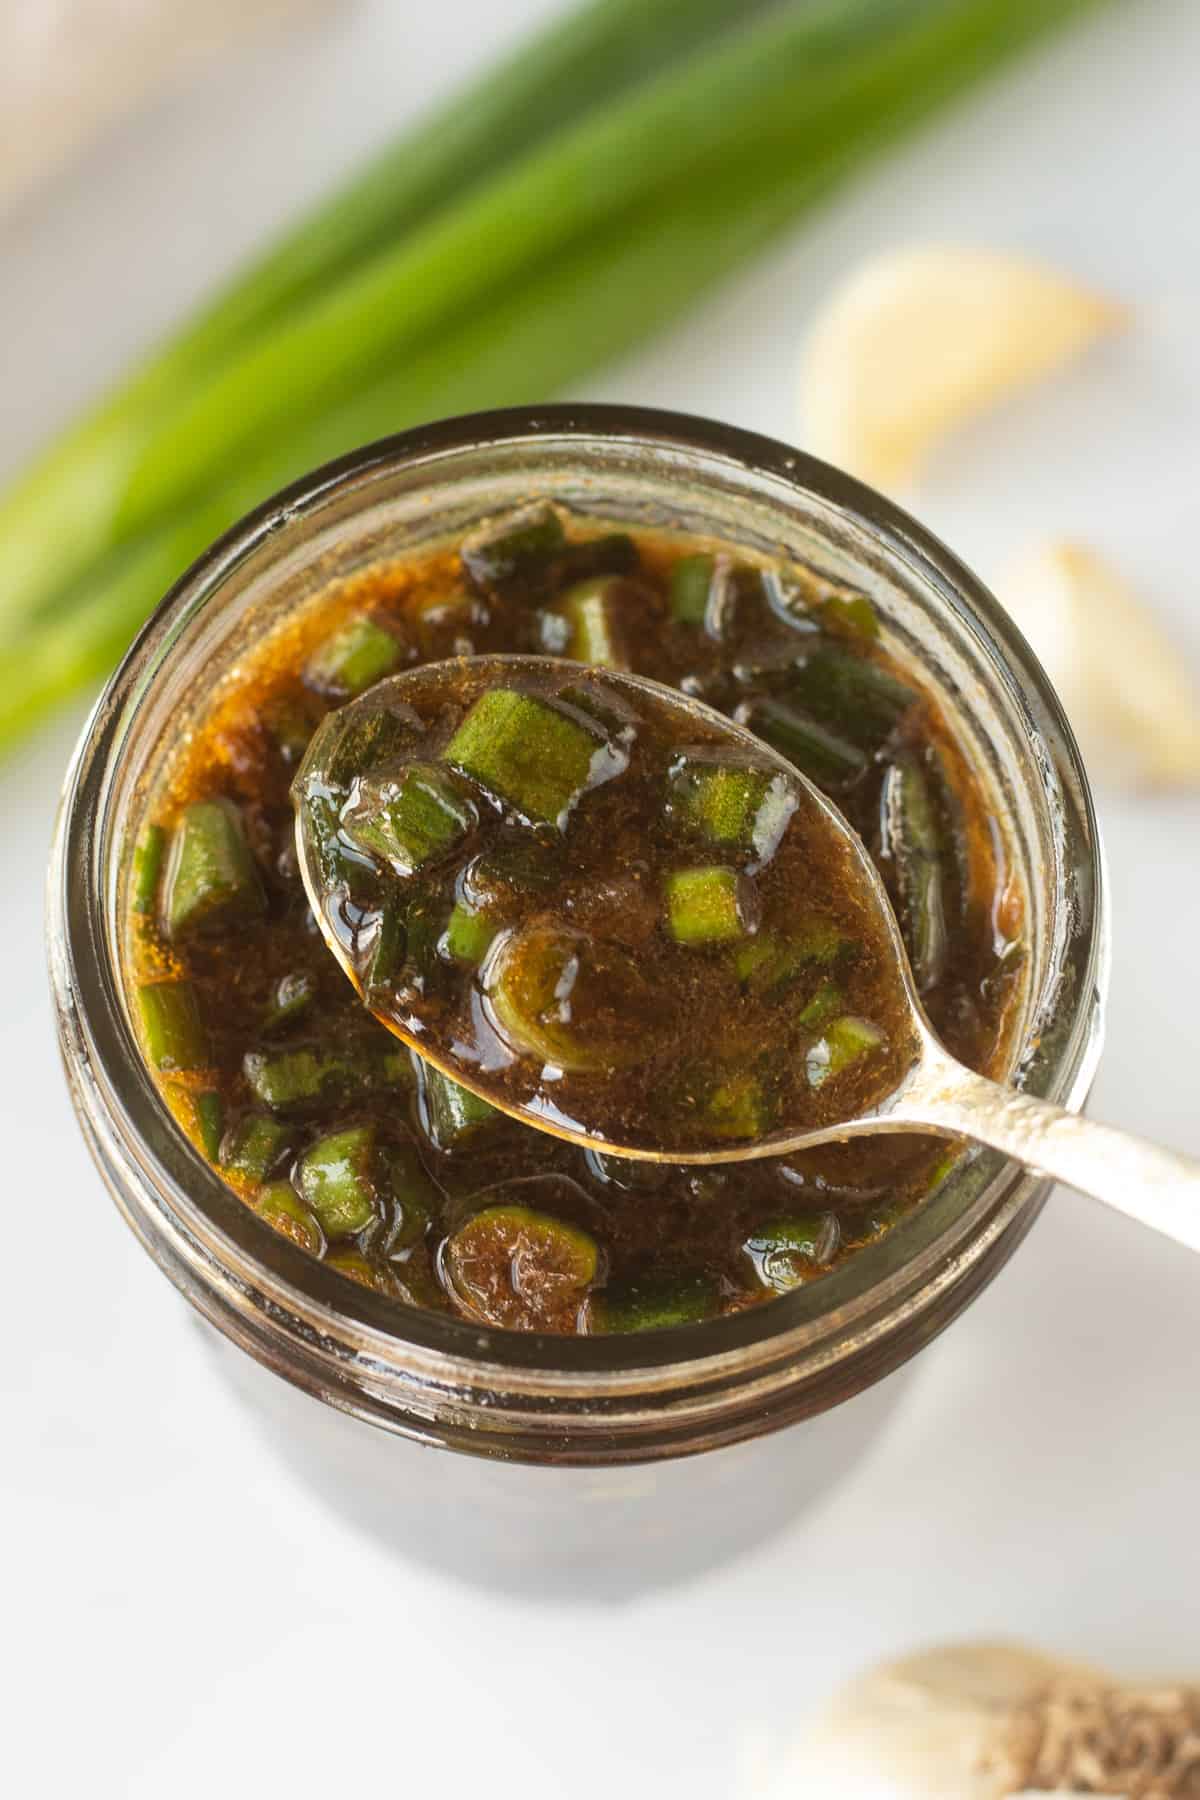 A small spoon dipping into a small mason jar with a brown marinade with chopped green onions in it. Fresh green onions and cloves of garlic are around the jar.